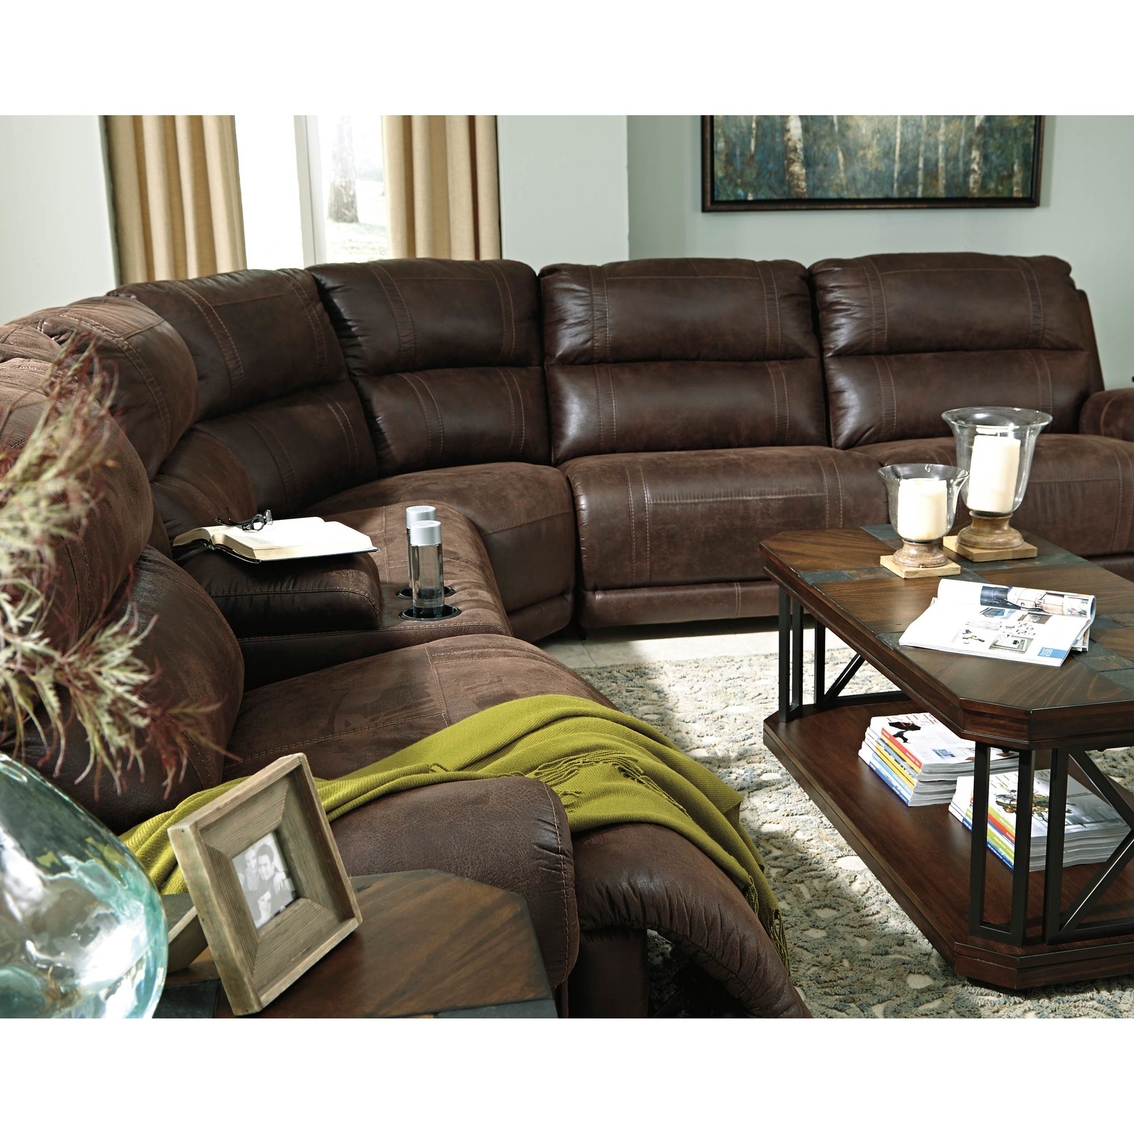 Ashley Luttrell 6 Pc. Sectional with 2 Power Recliners and Storage Console - Image 2 of 3